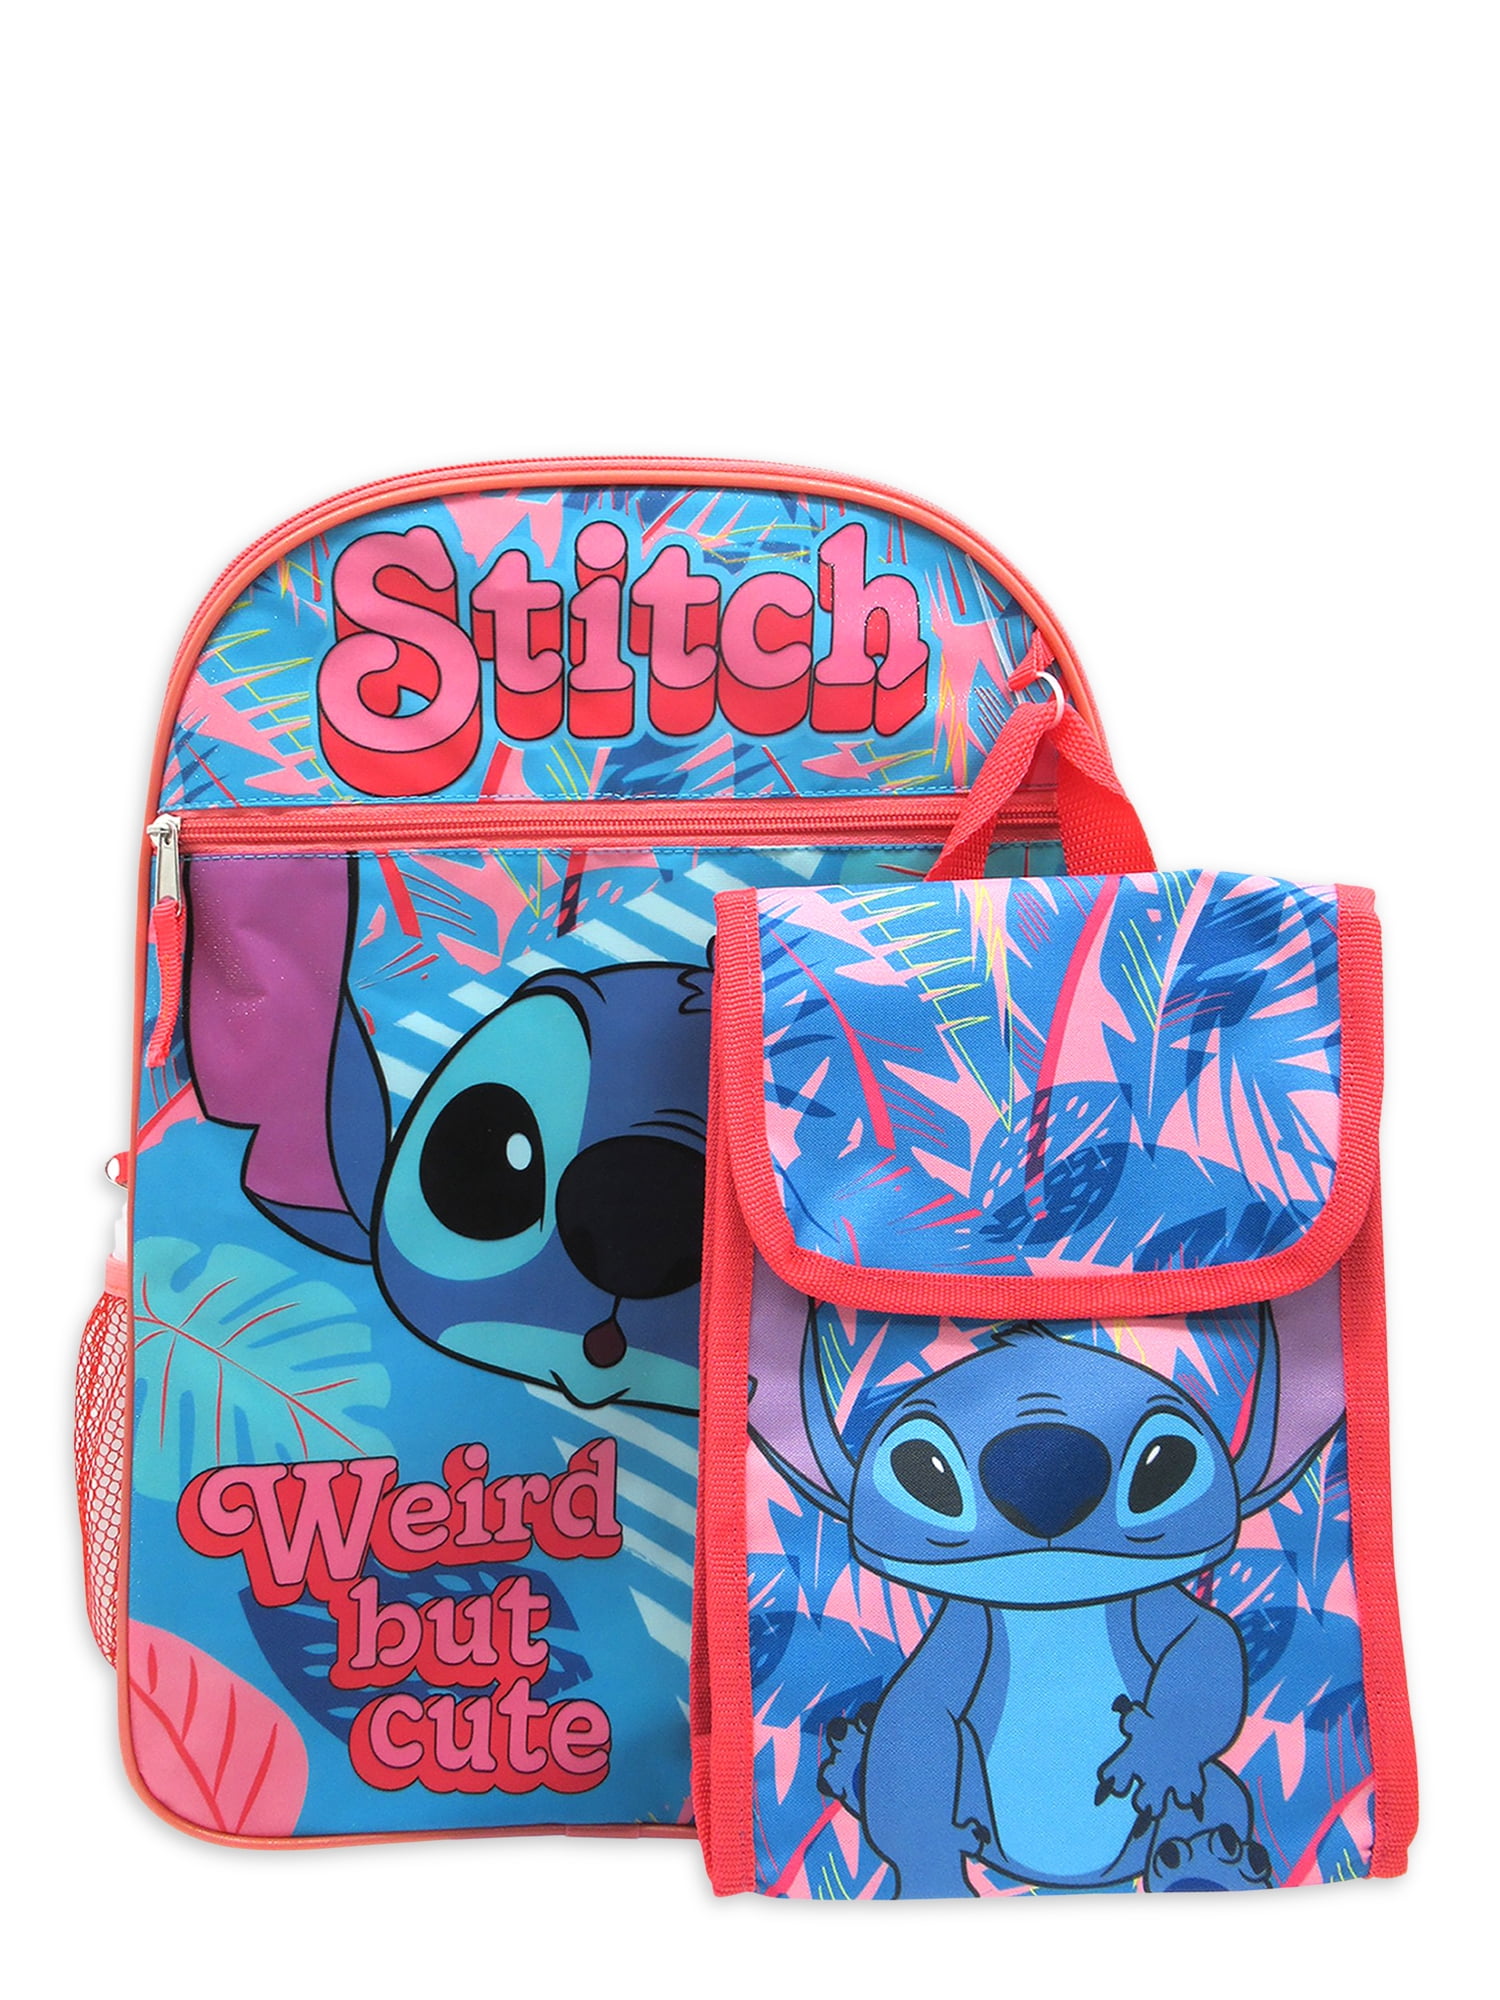 Stitch Mini Backpack with Lunch Box Set for Toddler Preschool - Bundle with  11'' Stitch Backpack Mini, Stitch Lunch Bag, Stickers, Temporary Tattoos